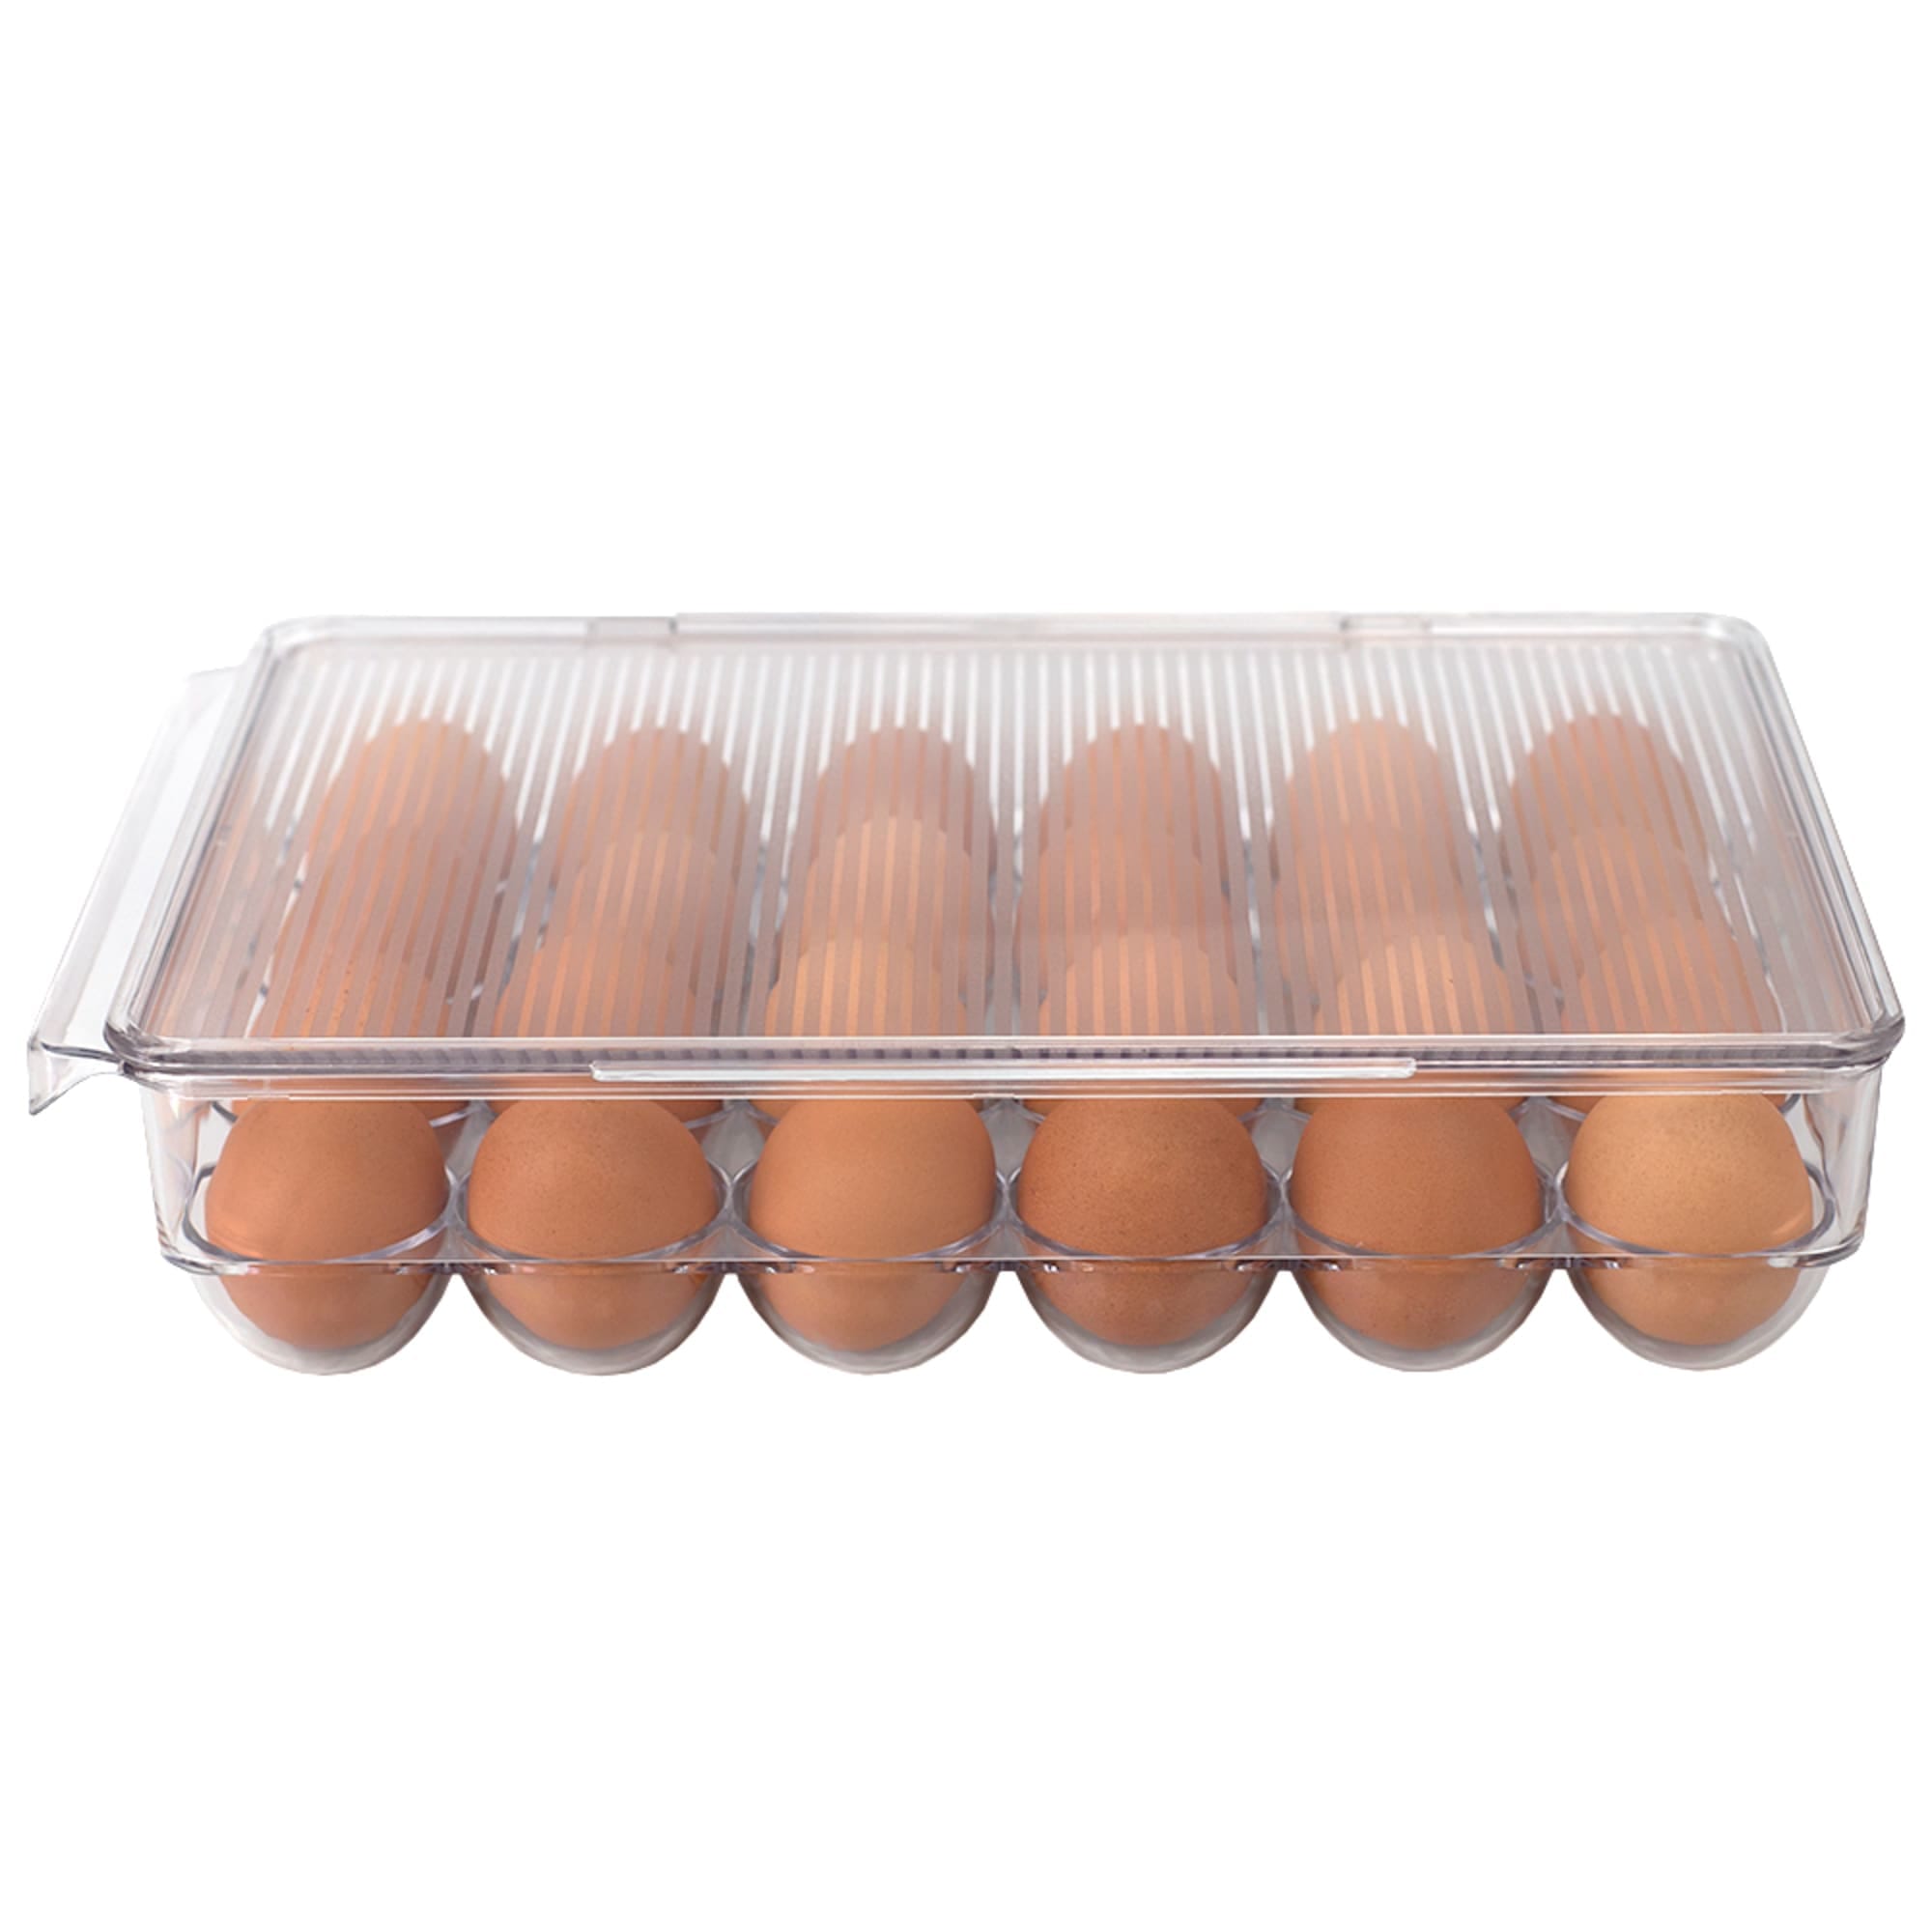 Home Basics Stackable 24 Compartment BPA Free Plastic  Extra Large Egg Holder Storage Tray with Lid, Clear $6.00 EACH, CASE PACK OF 12